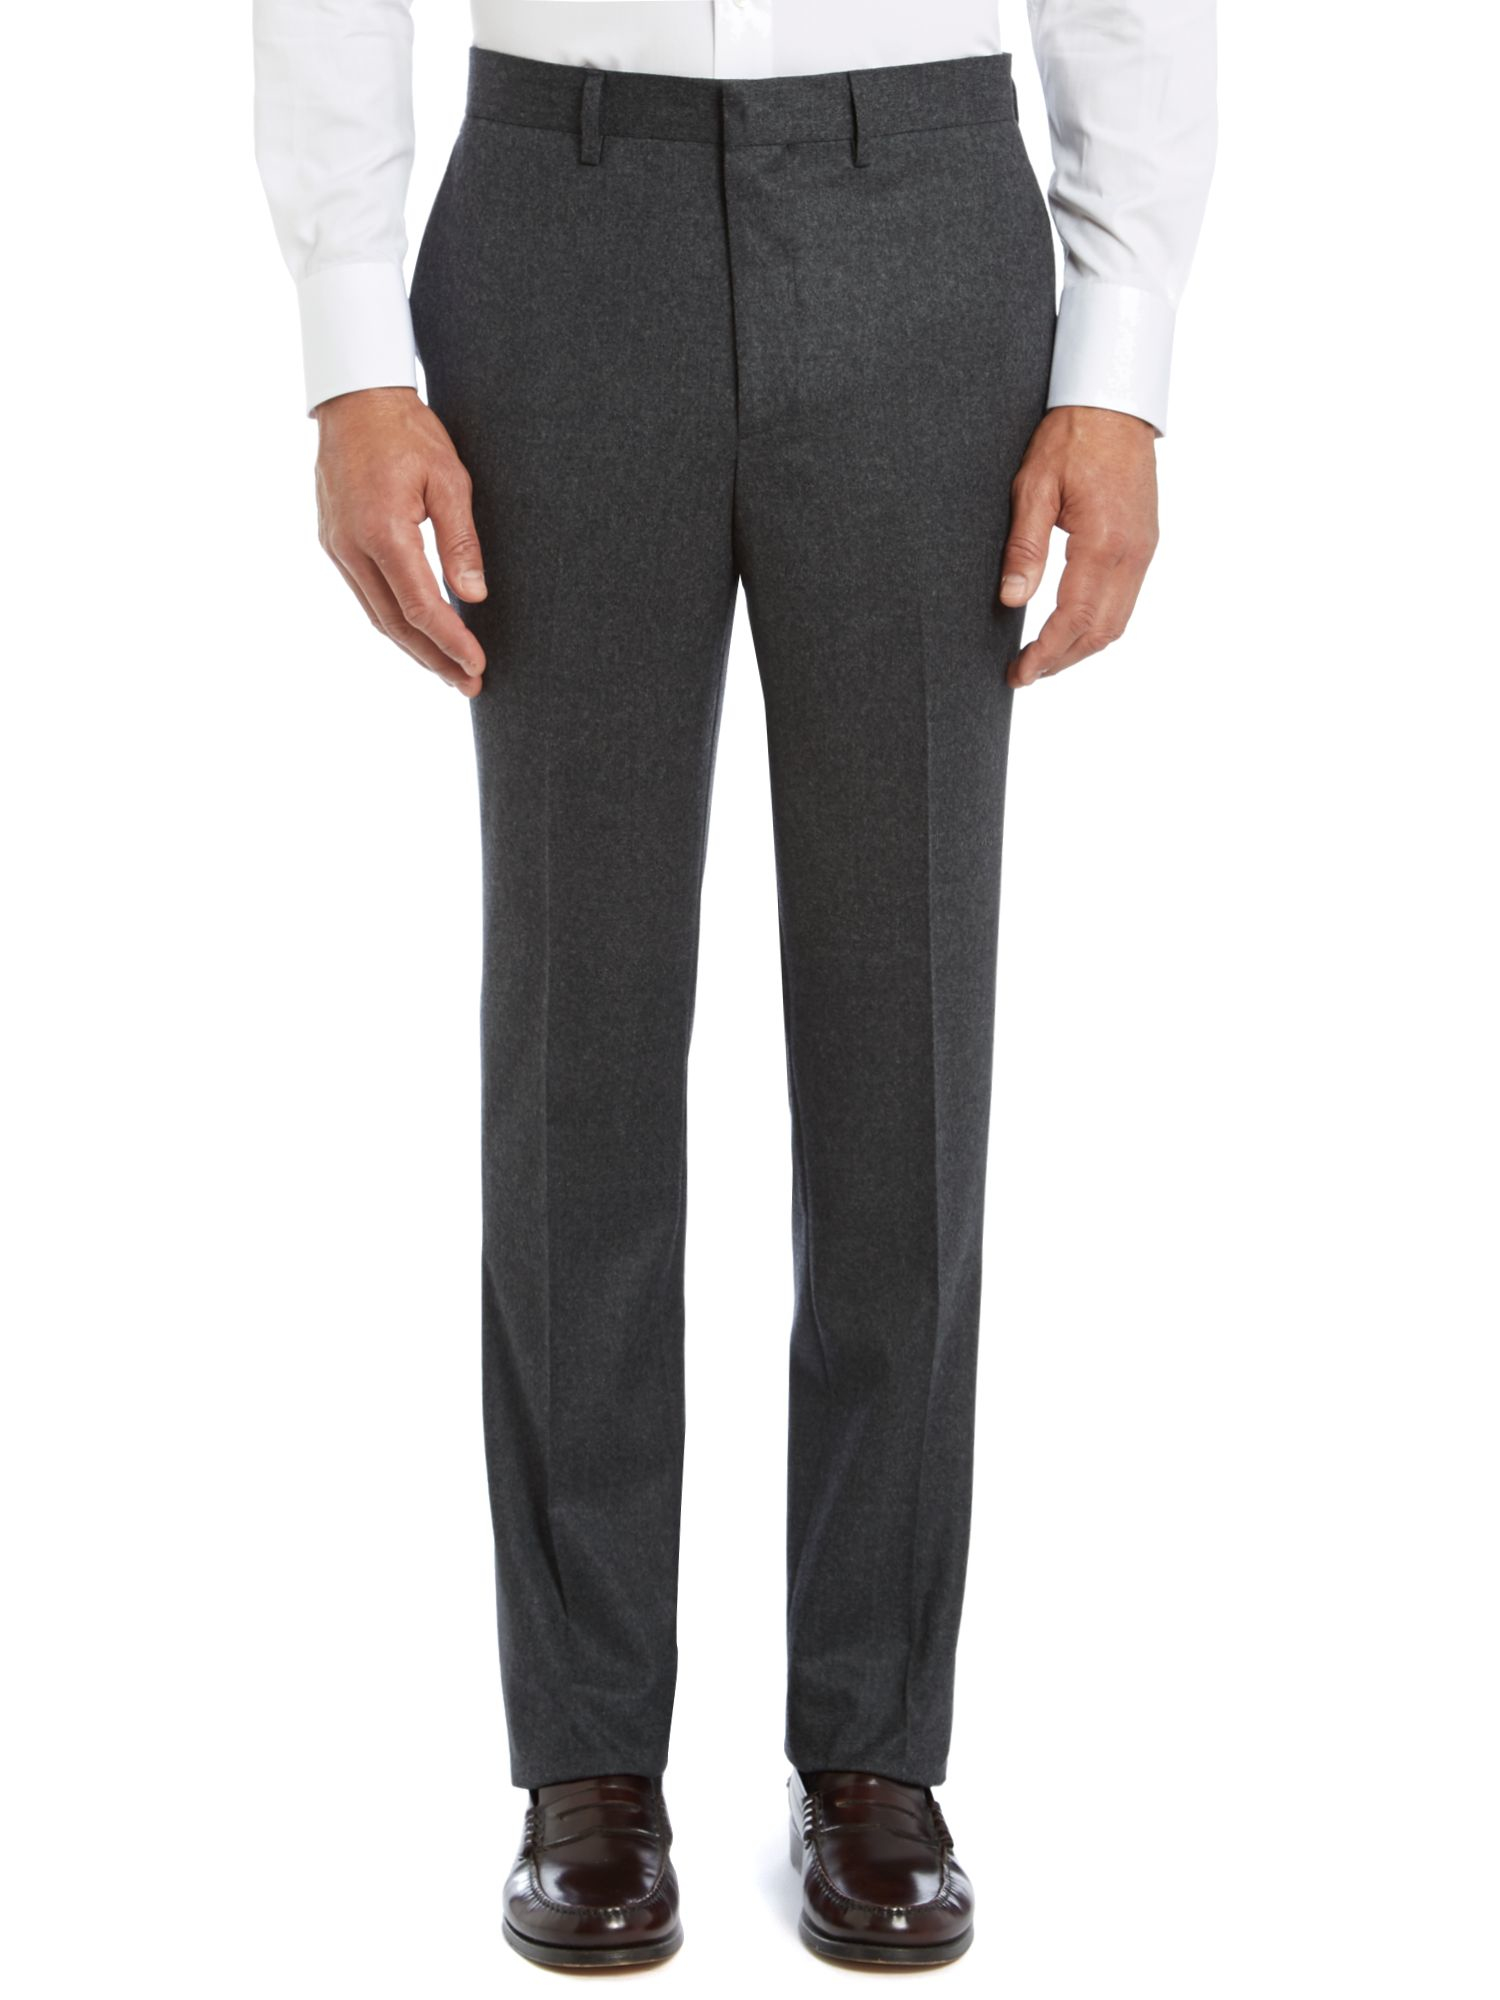 Chester barrie Flannel Trousers in Gray for Men (Charcoal) - Save 78% ...